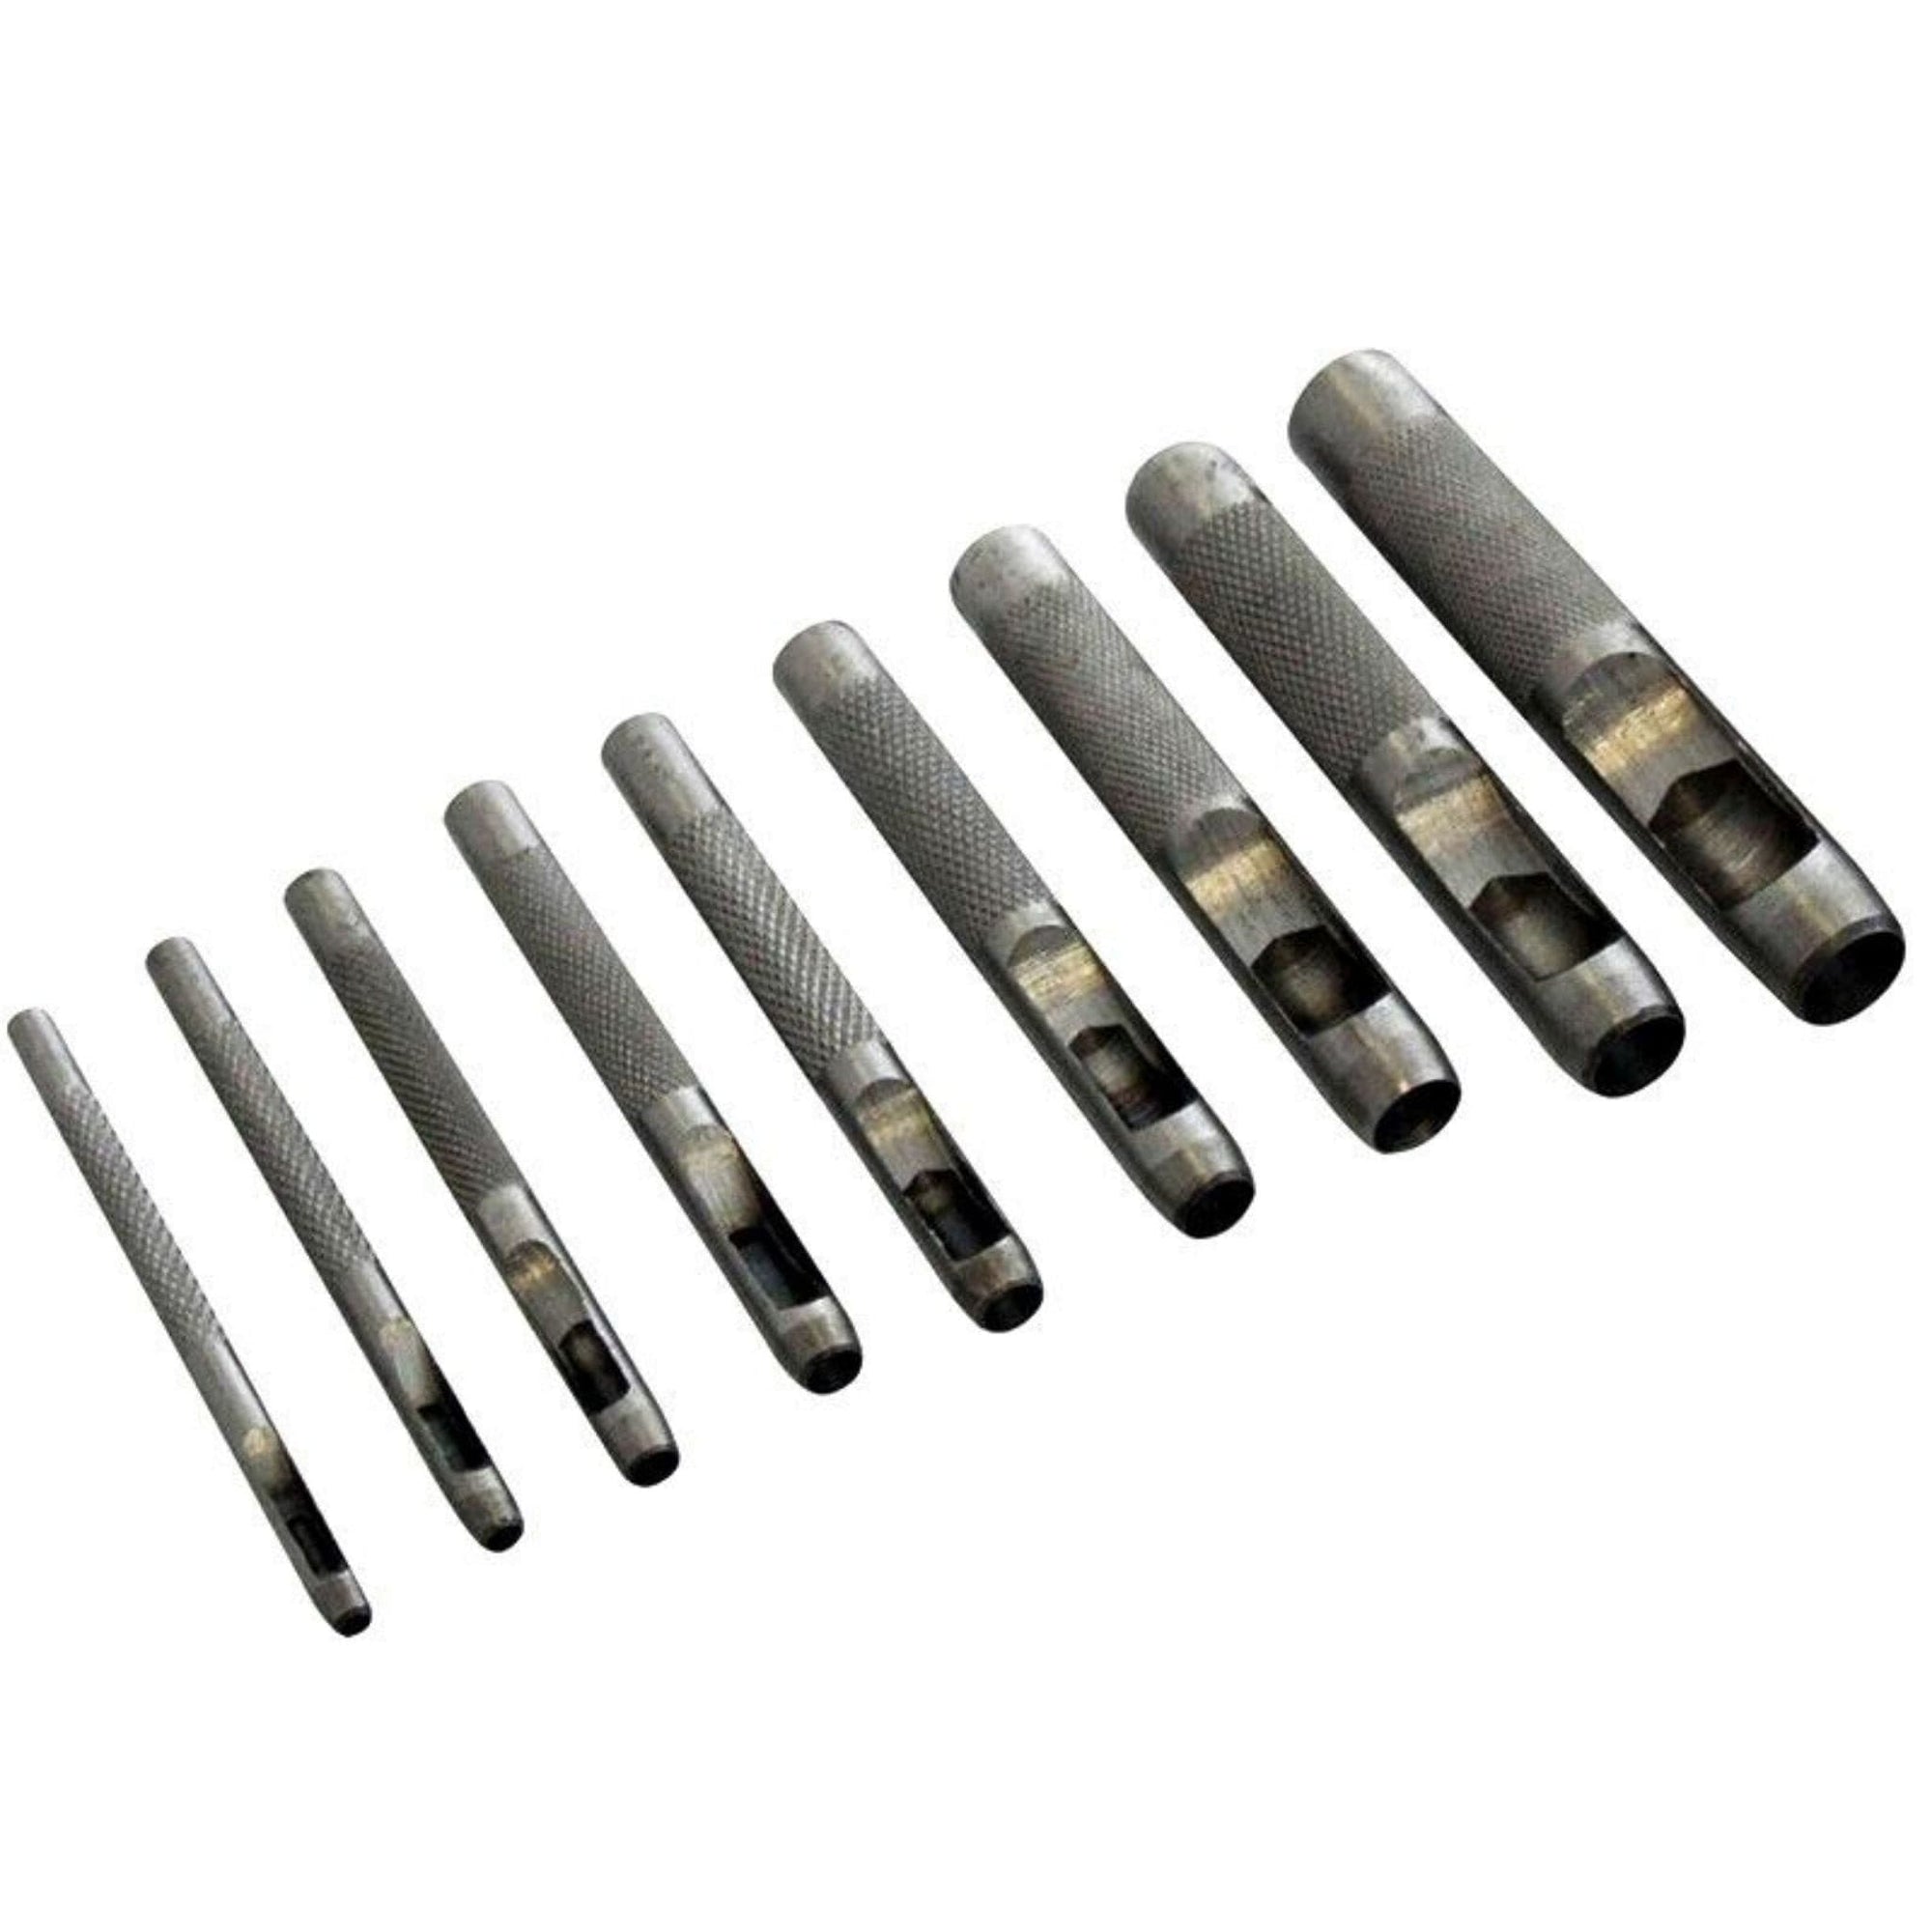 9 piece hollow punch set - South East Clearance Centre